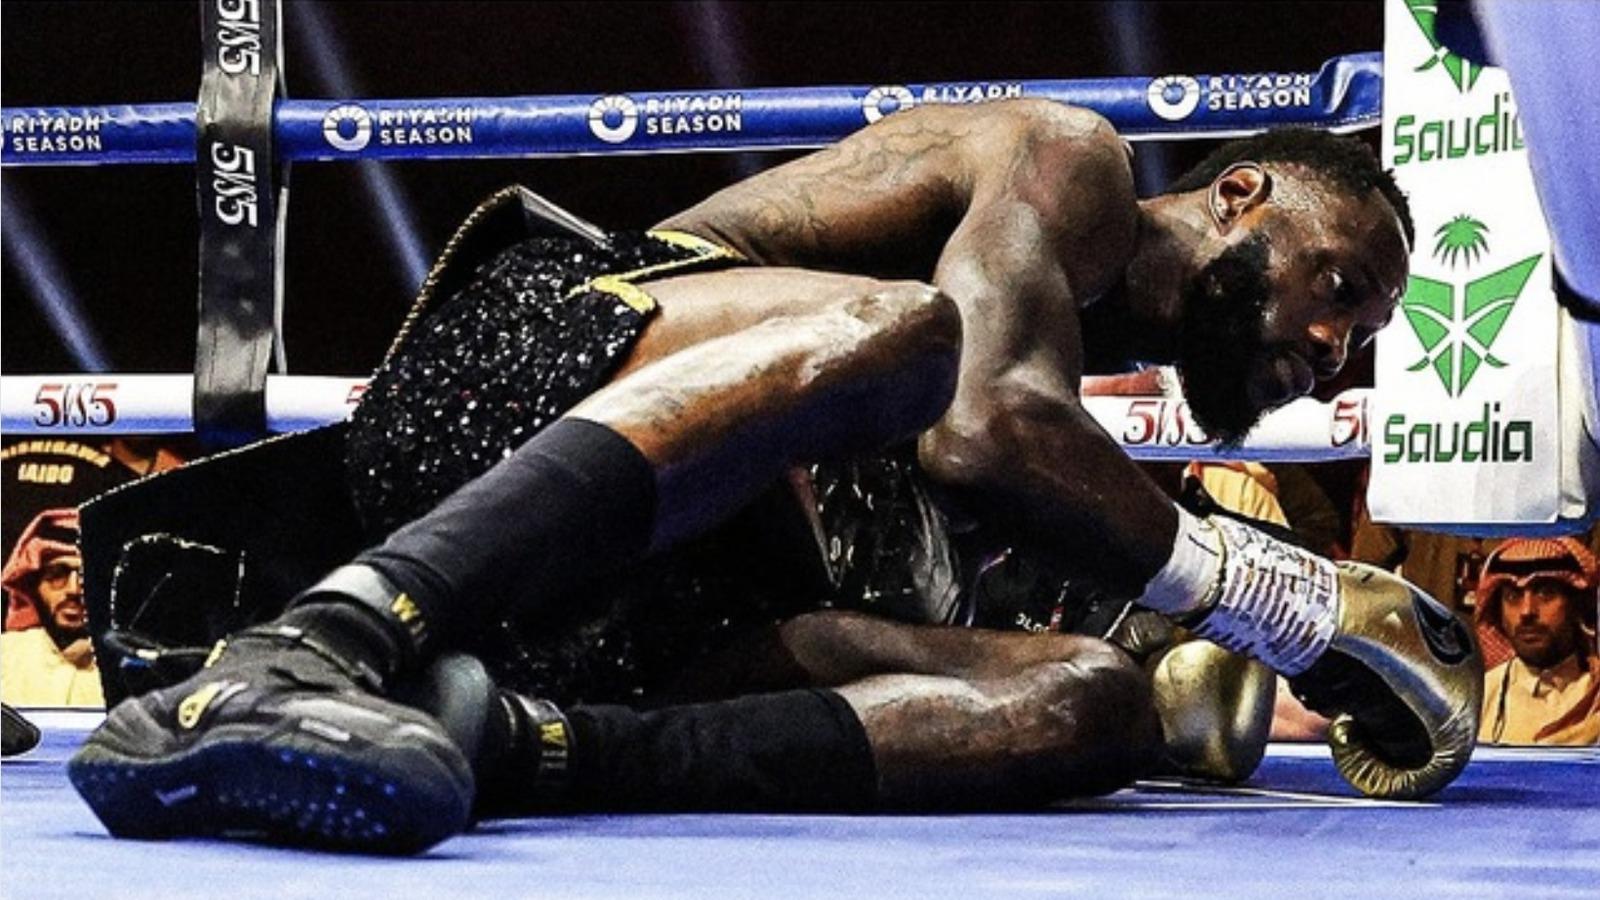 Deontay Wilder suffered a devastating loss at the hands of Zhilei Zhang. Now, retirement is on Wilder’s mind.